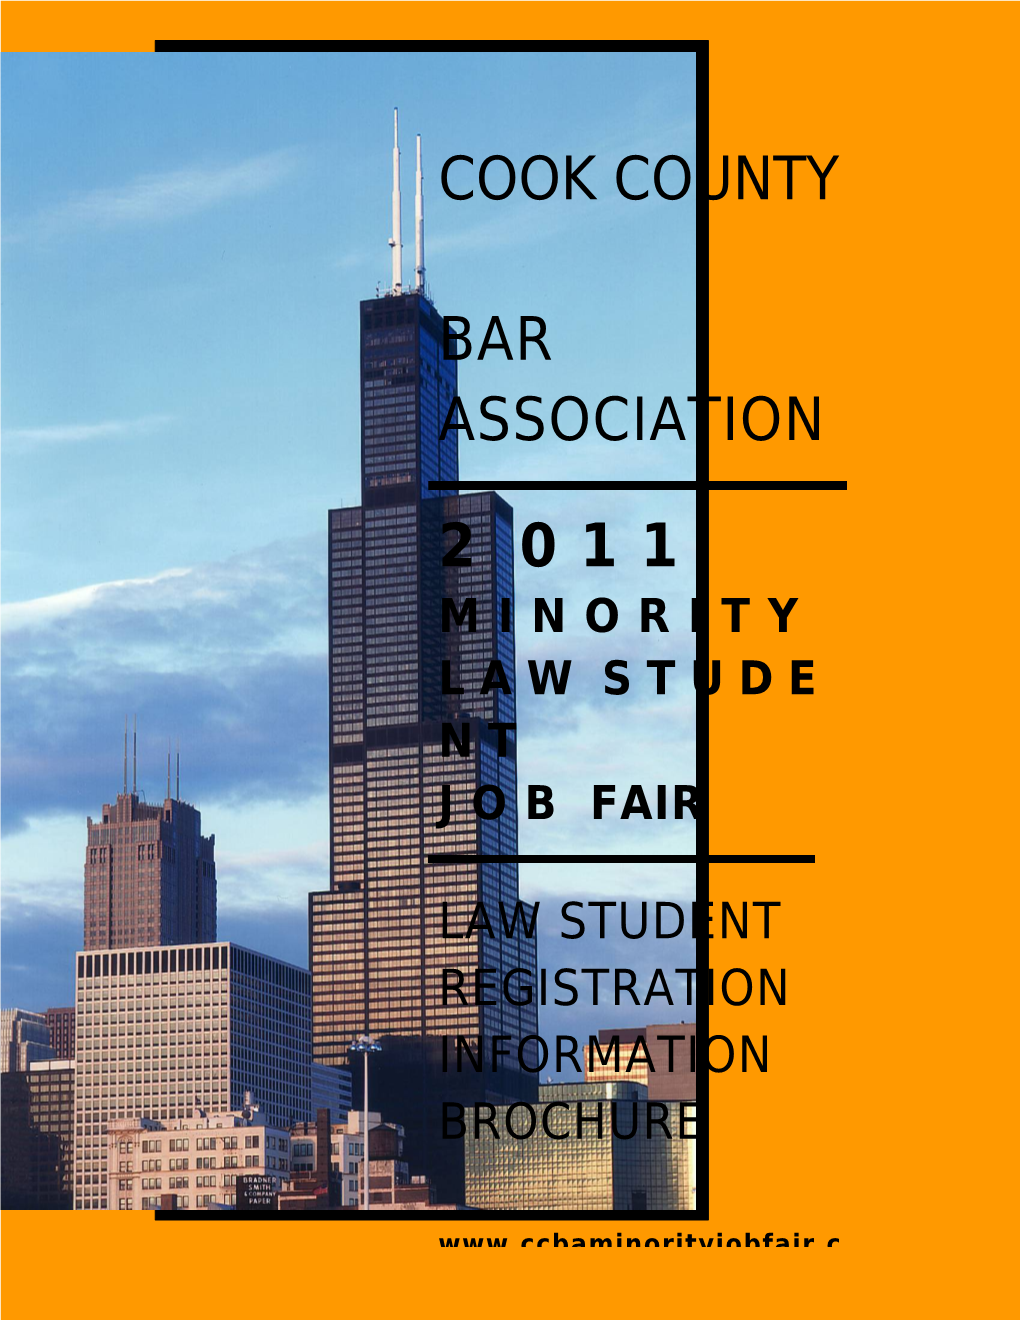 The 2011 Cook County Bar Association